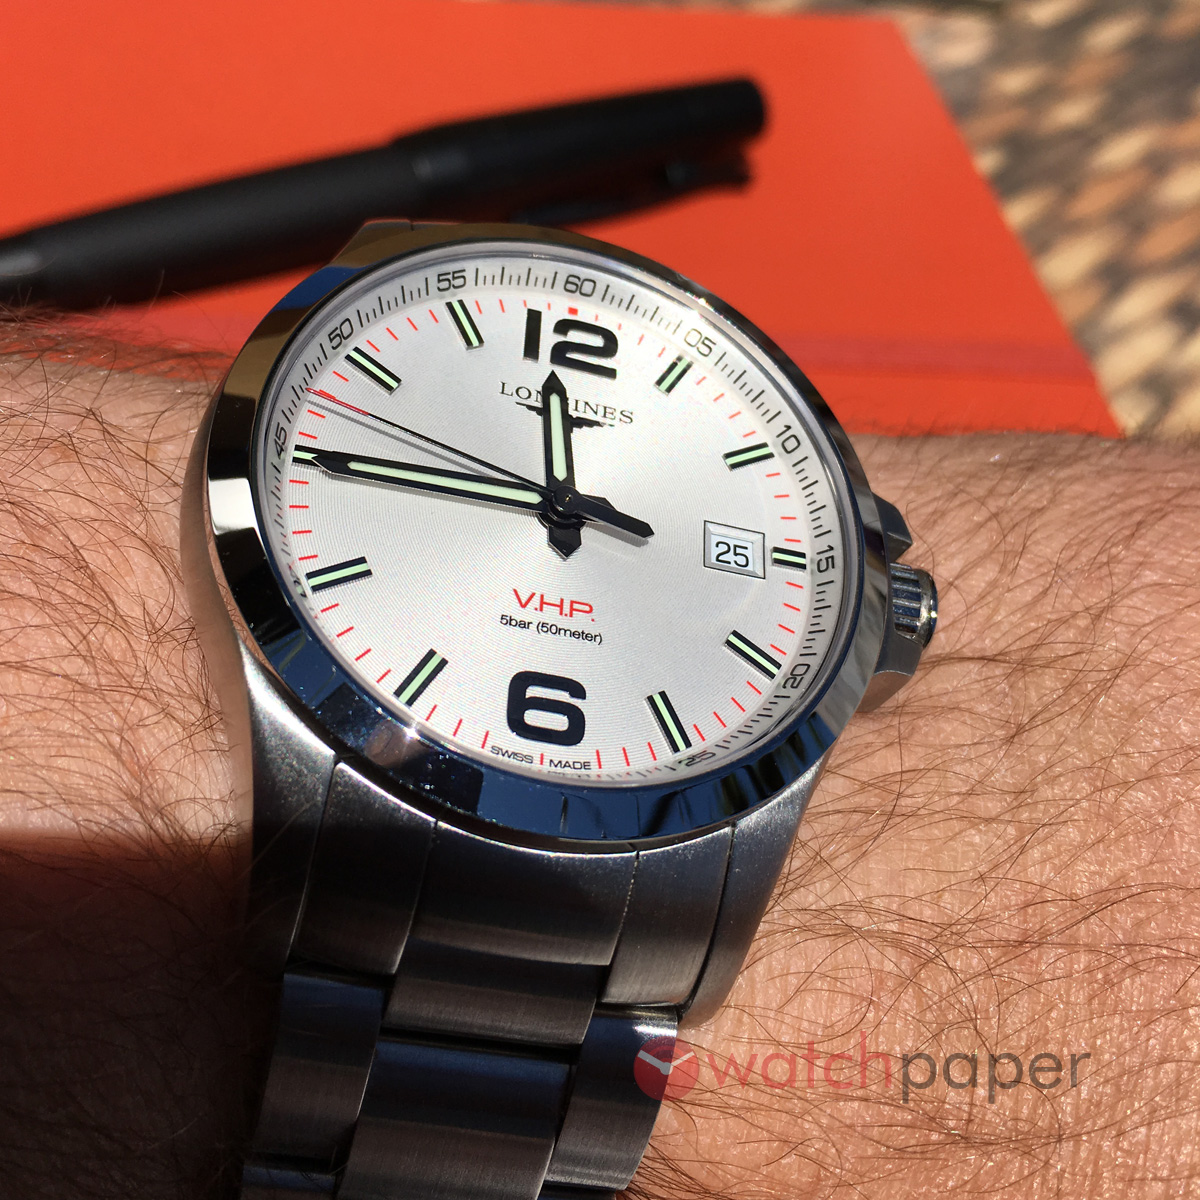 Longines Vhp Review | vlr.eng.br